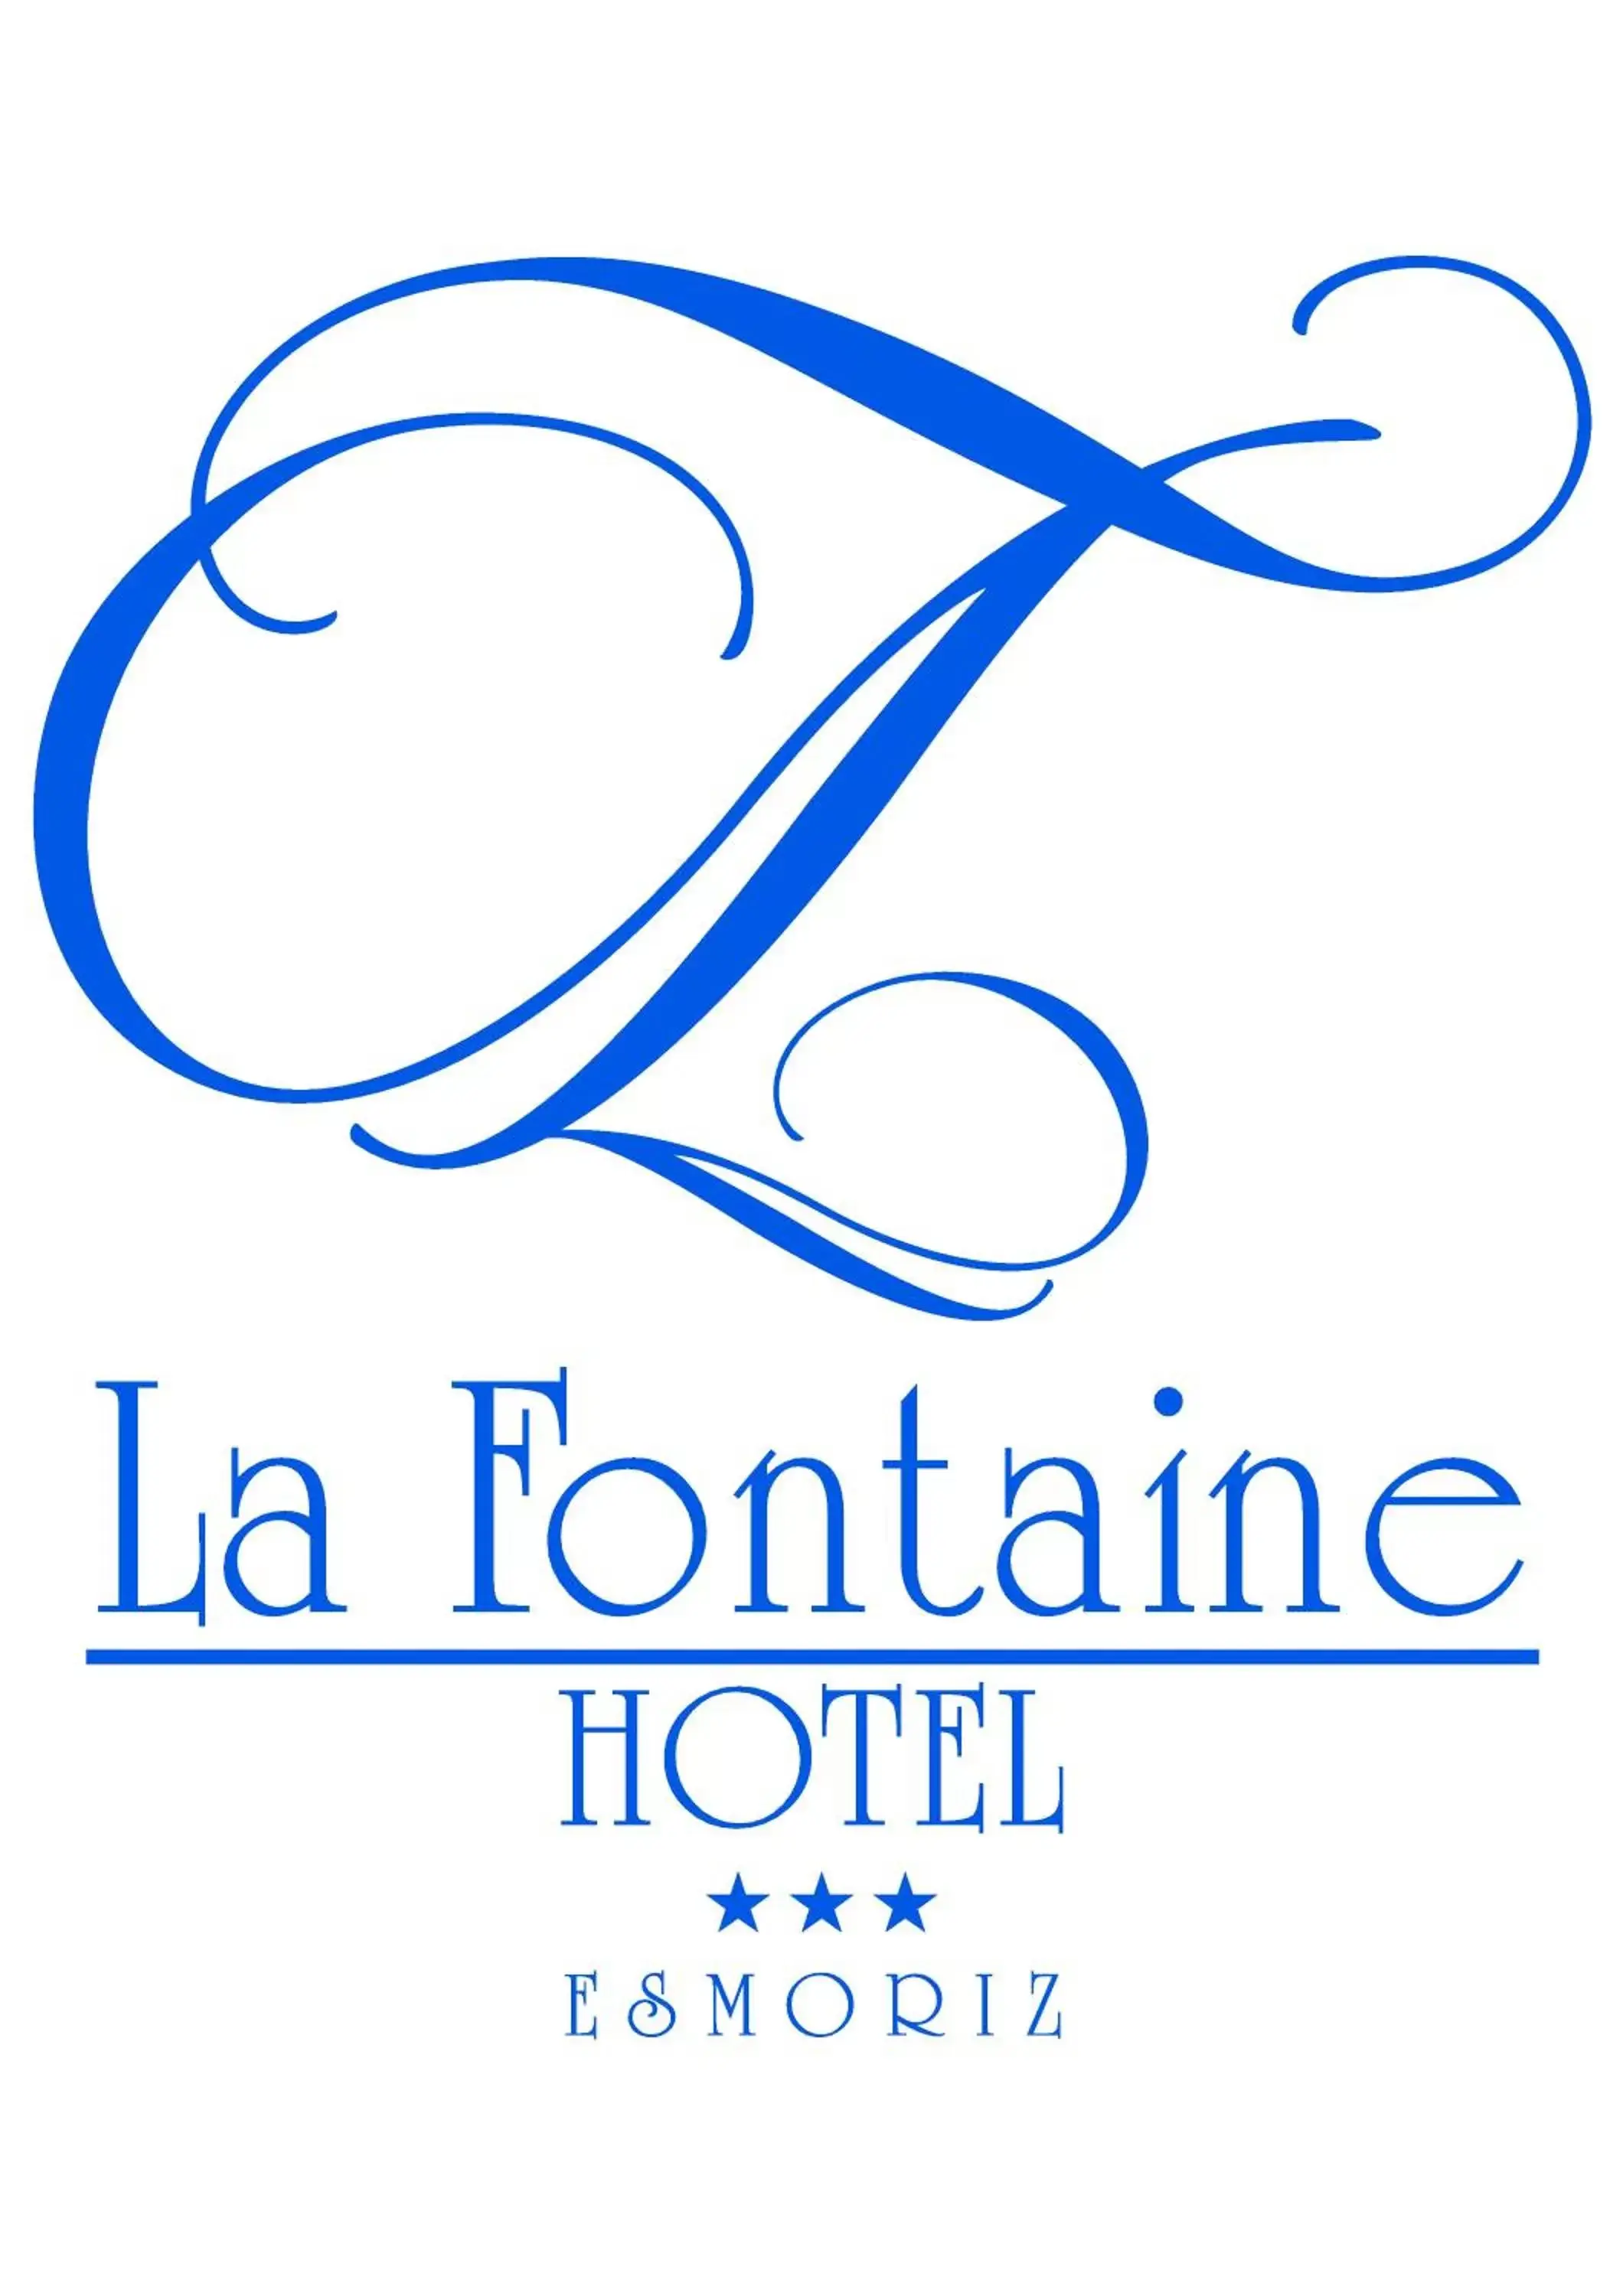 Property logo or sign, Property Logo/Sign in Hotel La Fontaine